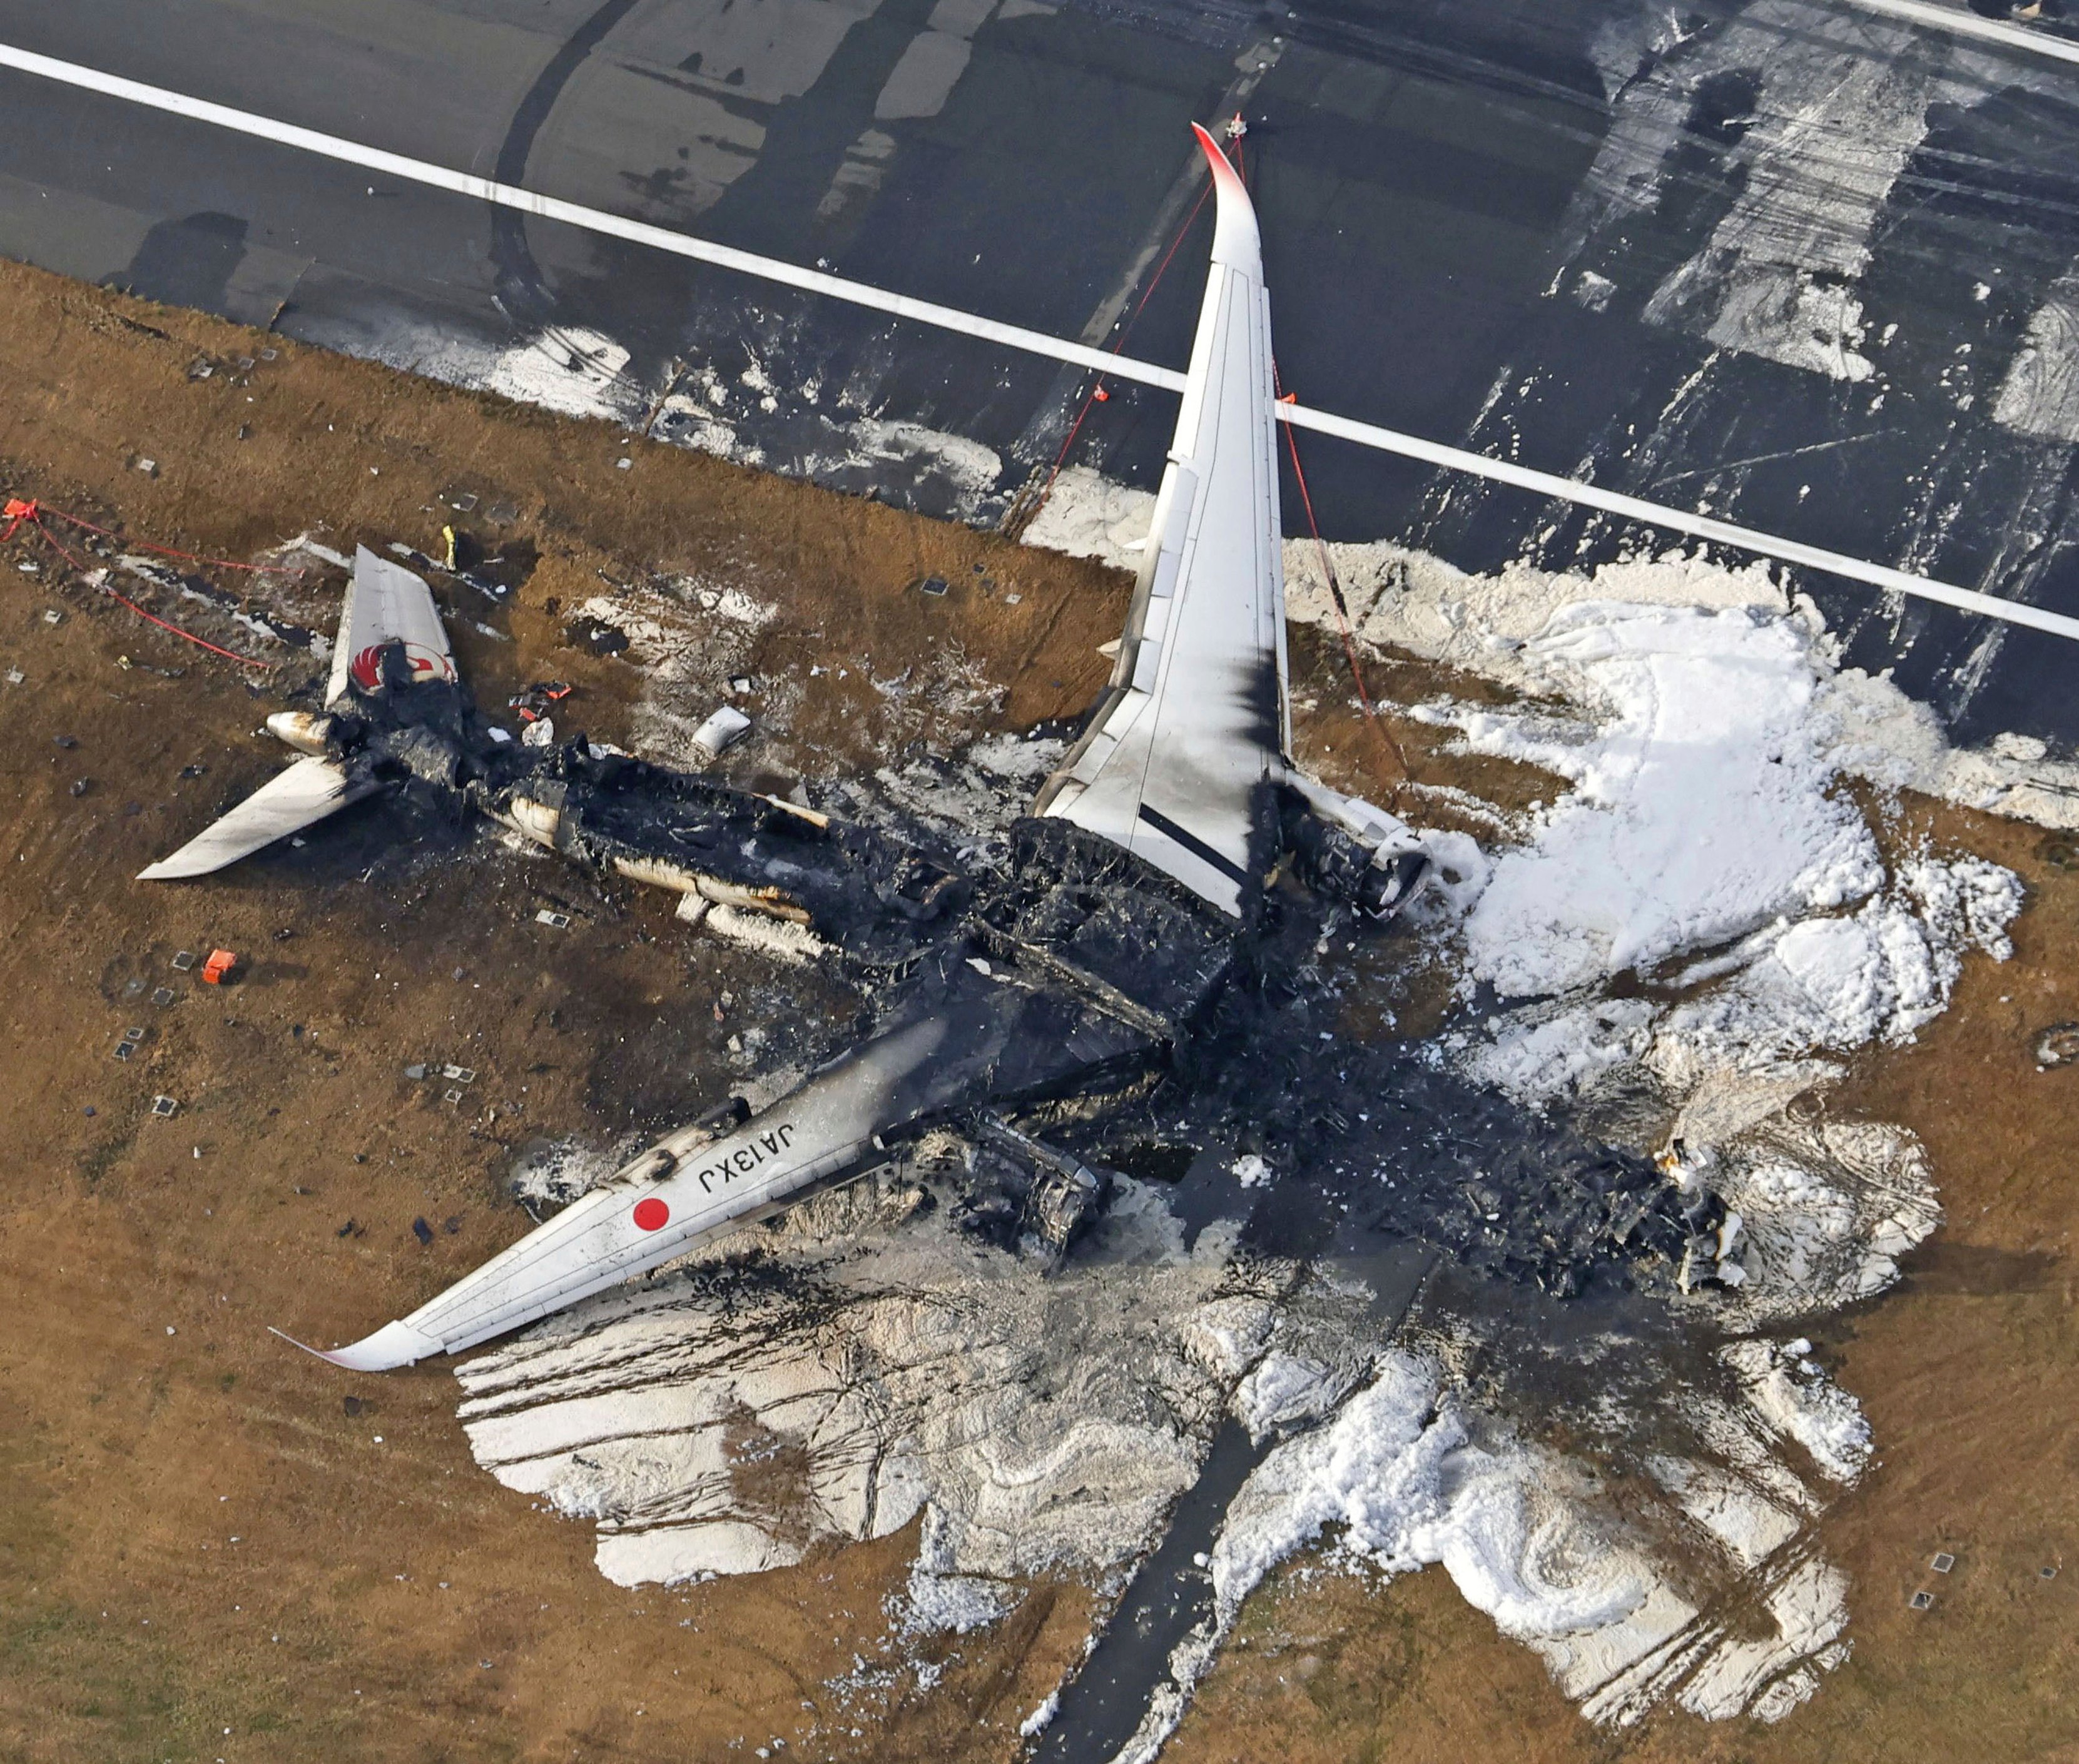 Japan’s transport ministry has introduced new safety rules following a fatal plane collision last week. Photo: Kyodo/AP